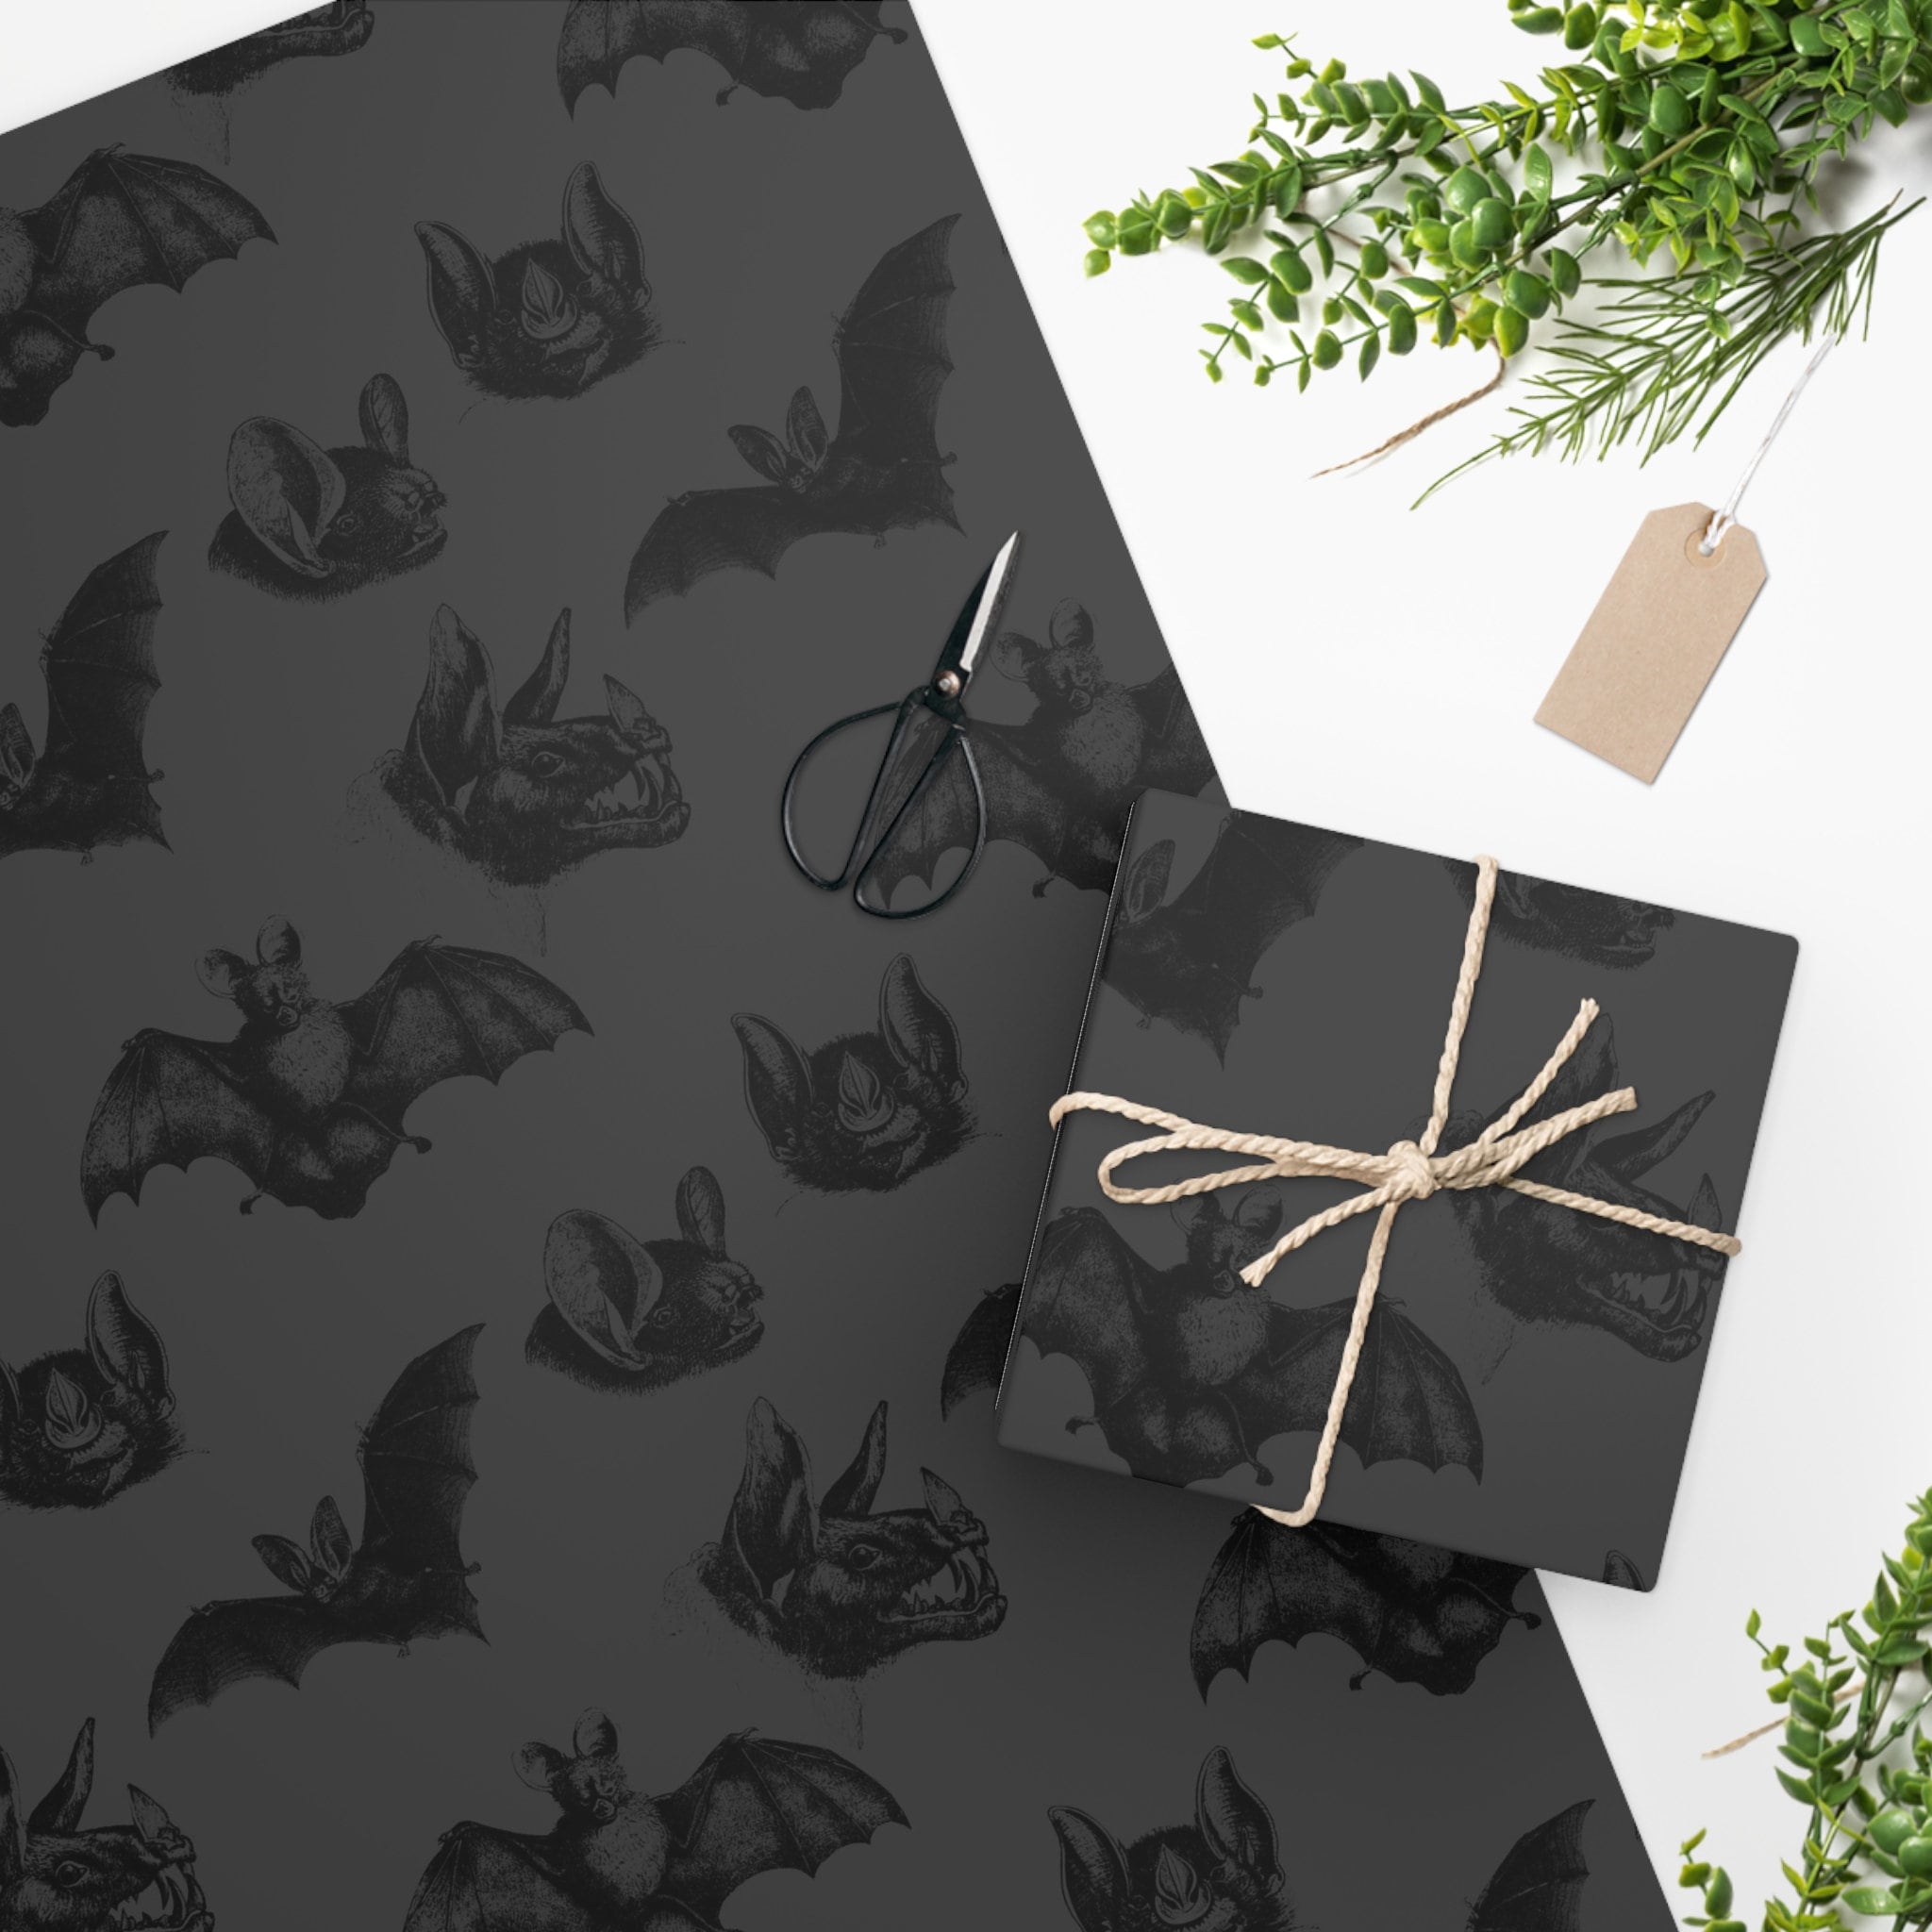 Retro Horror Christmas Wrapping Paper – Spooky Cat Press